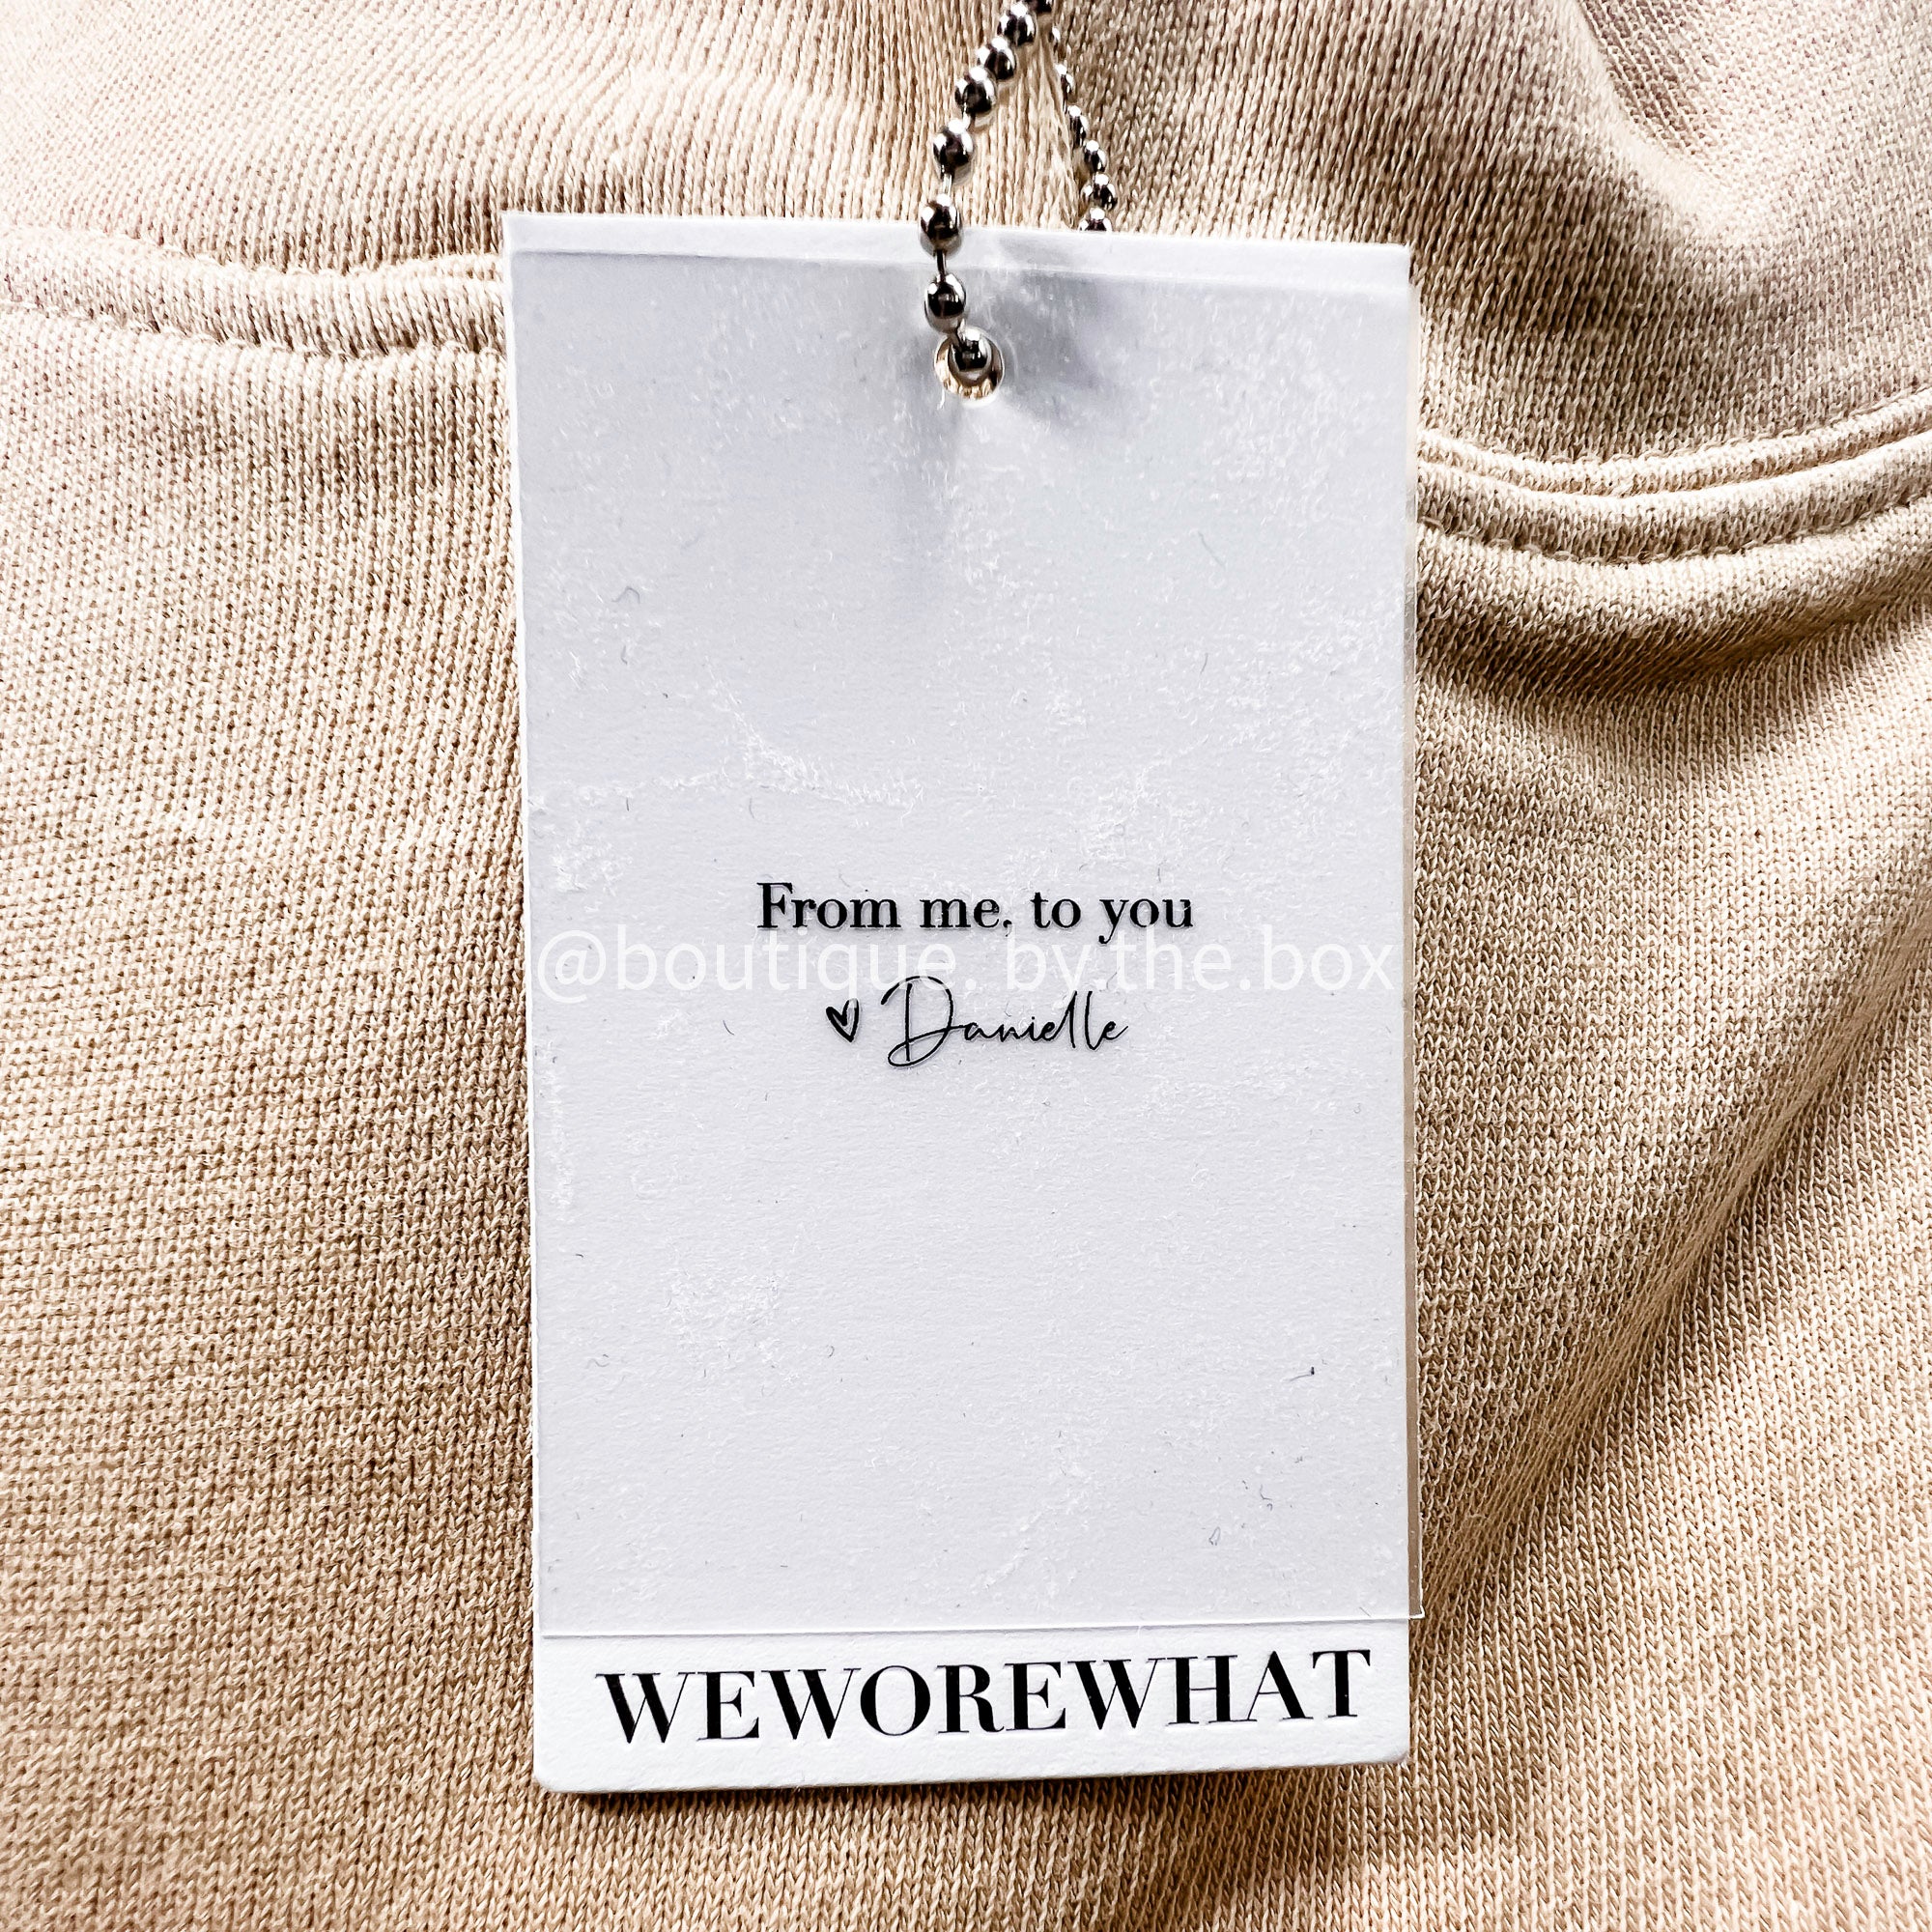 We Wore What Revolve Athleisure Women's New Wholesale